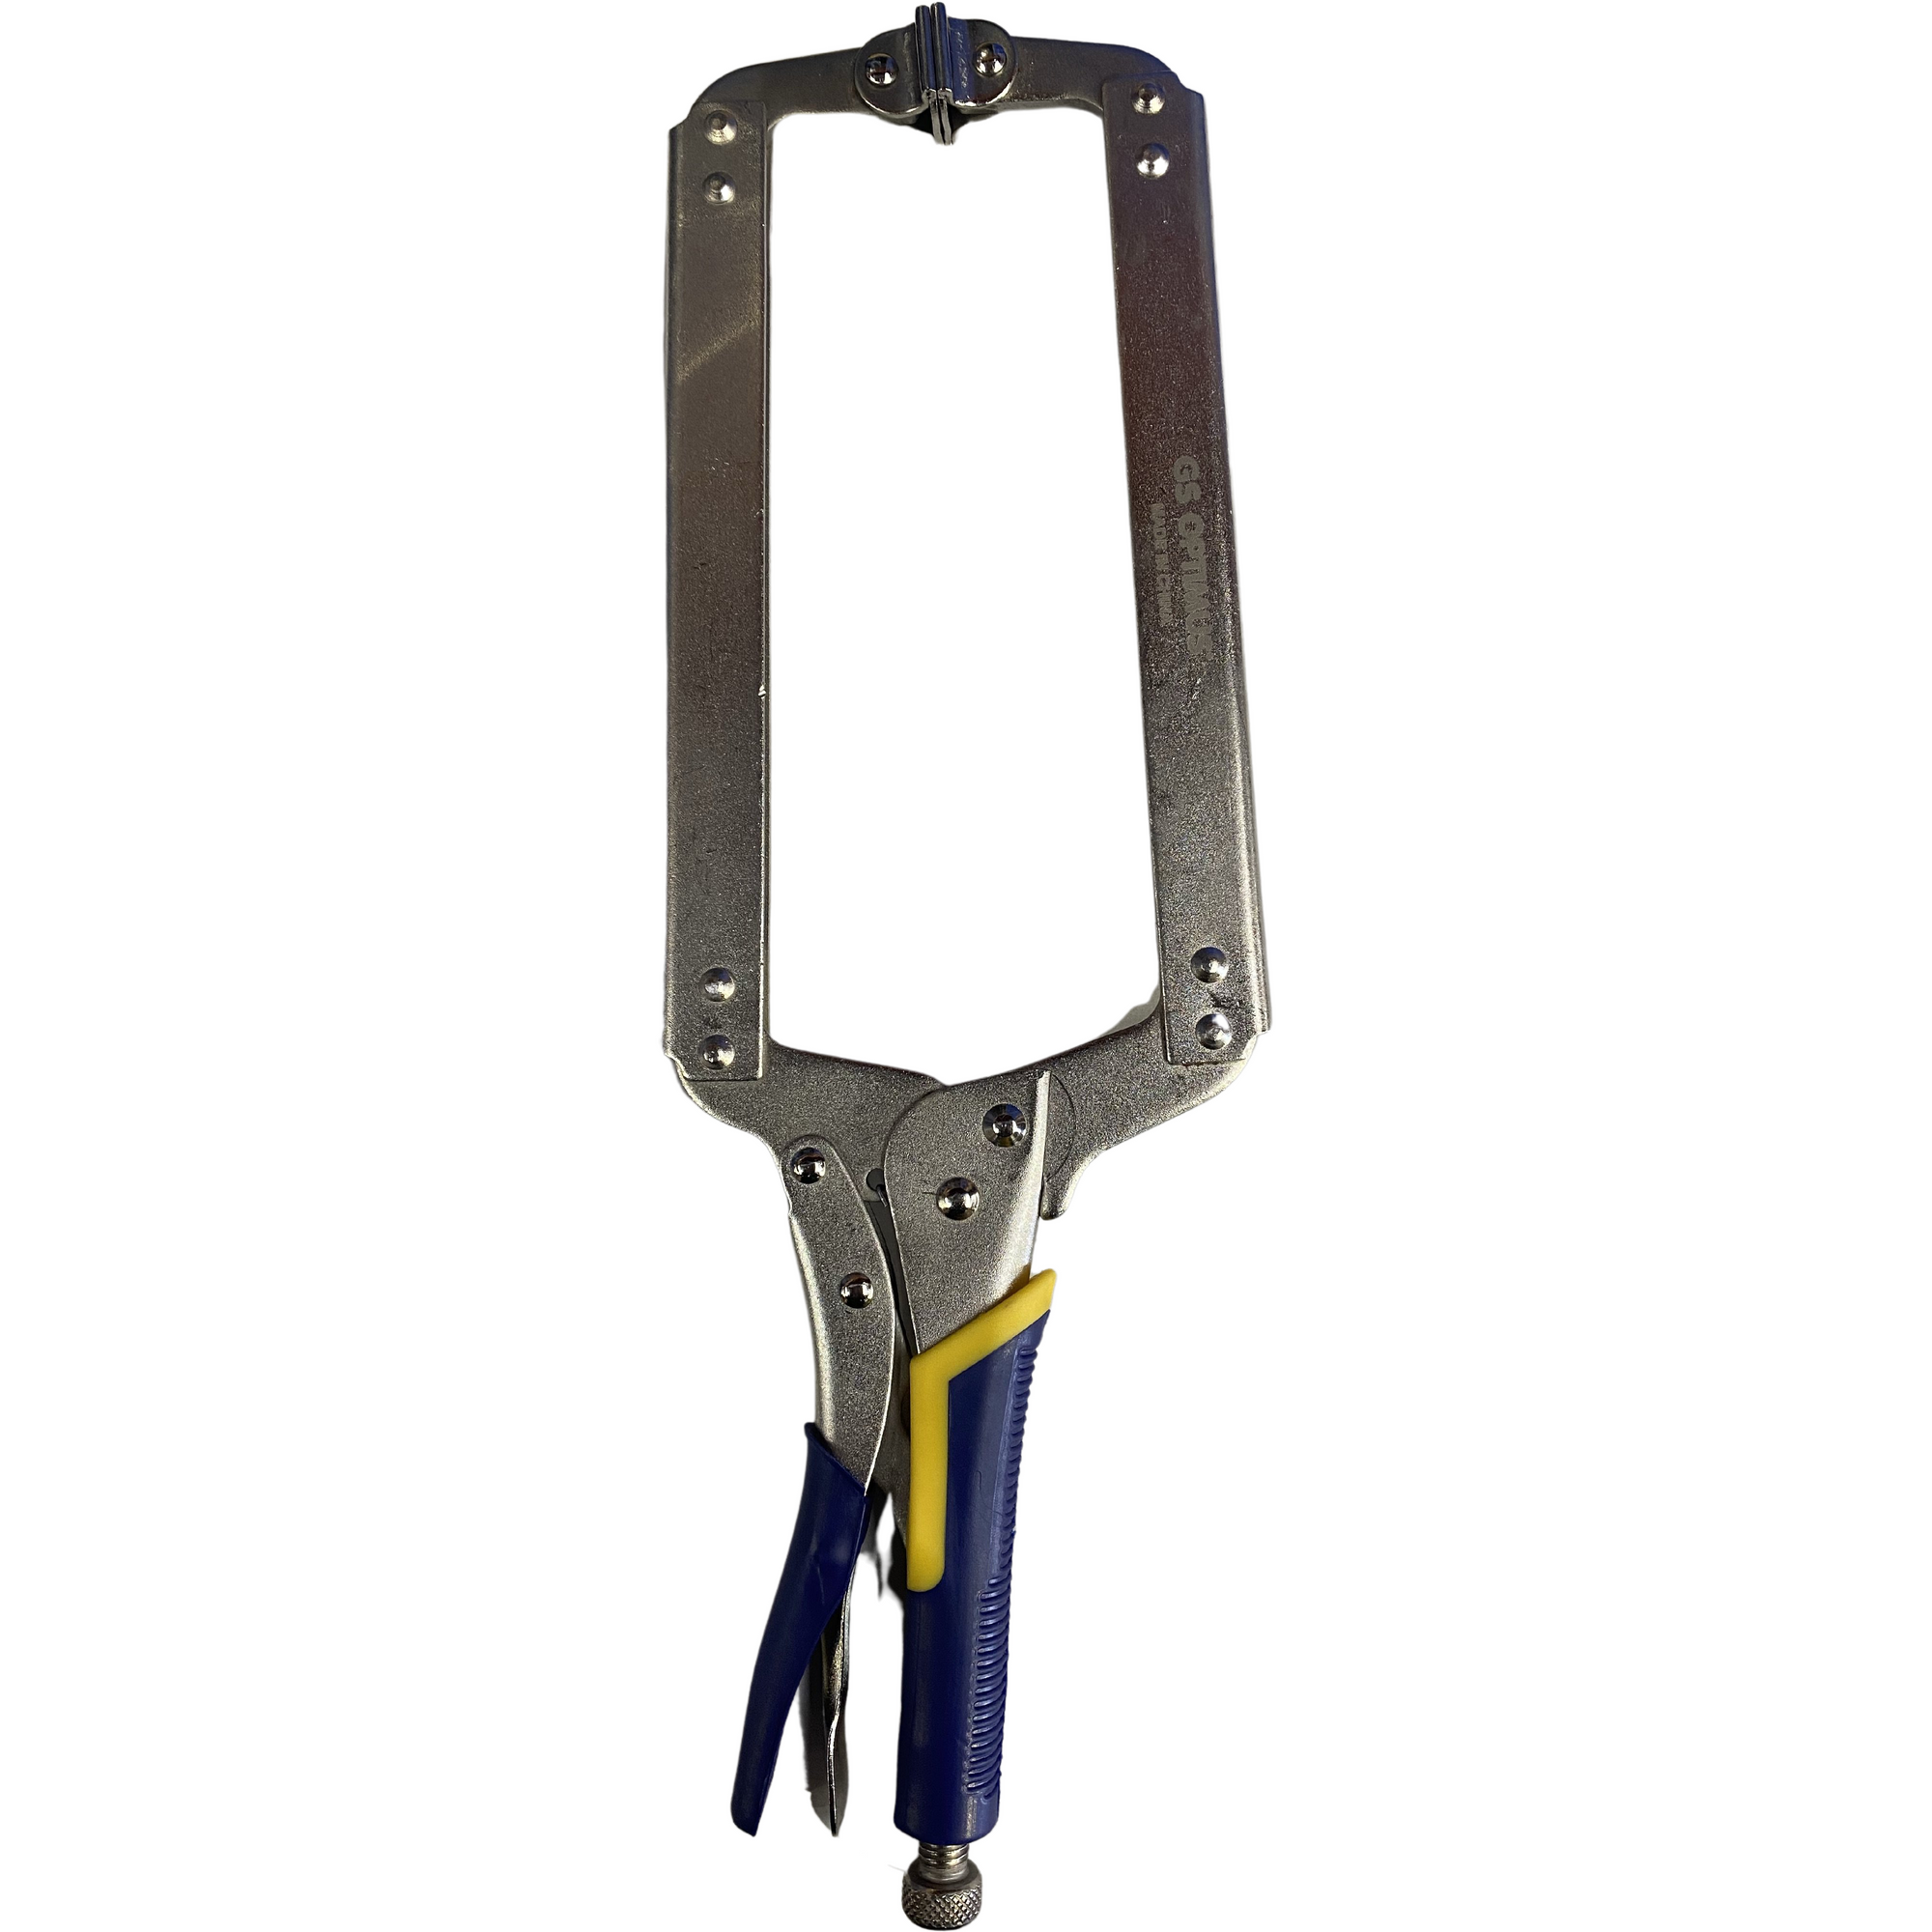 18” c clamp locking plier - South East Clearance Centre